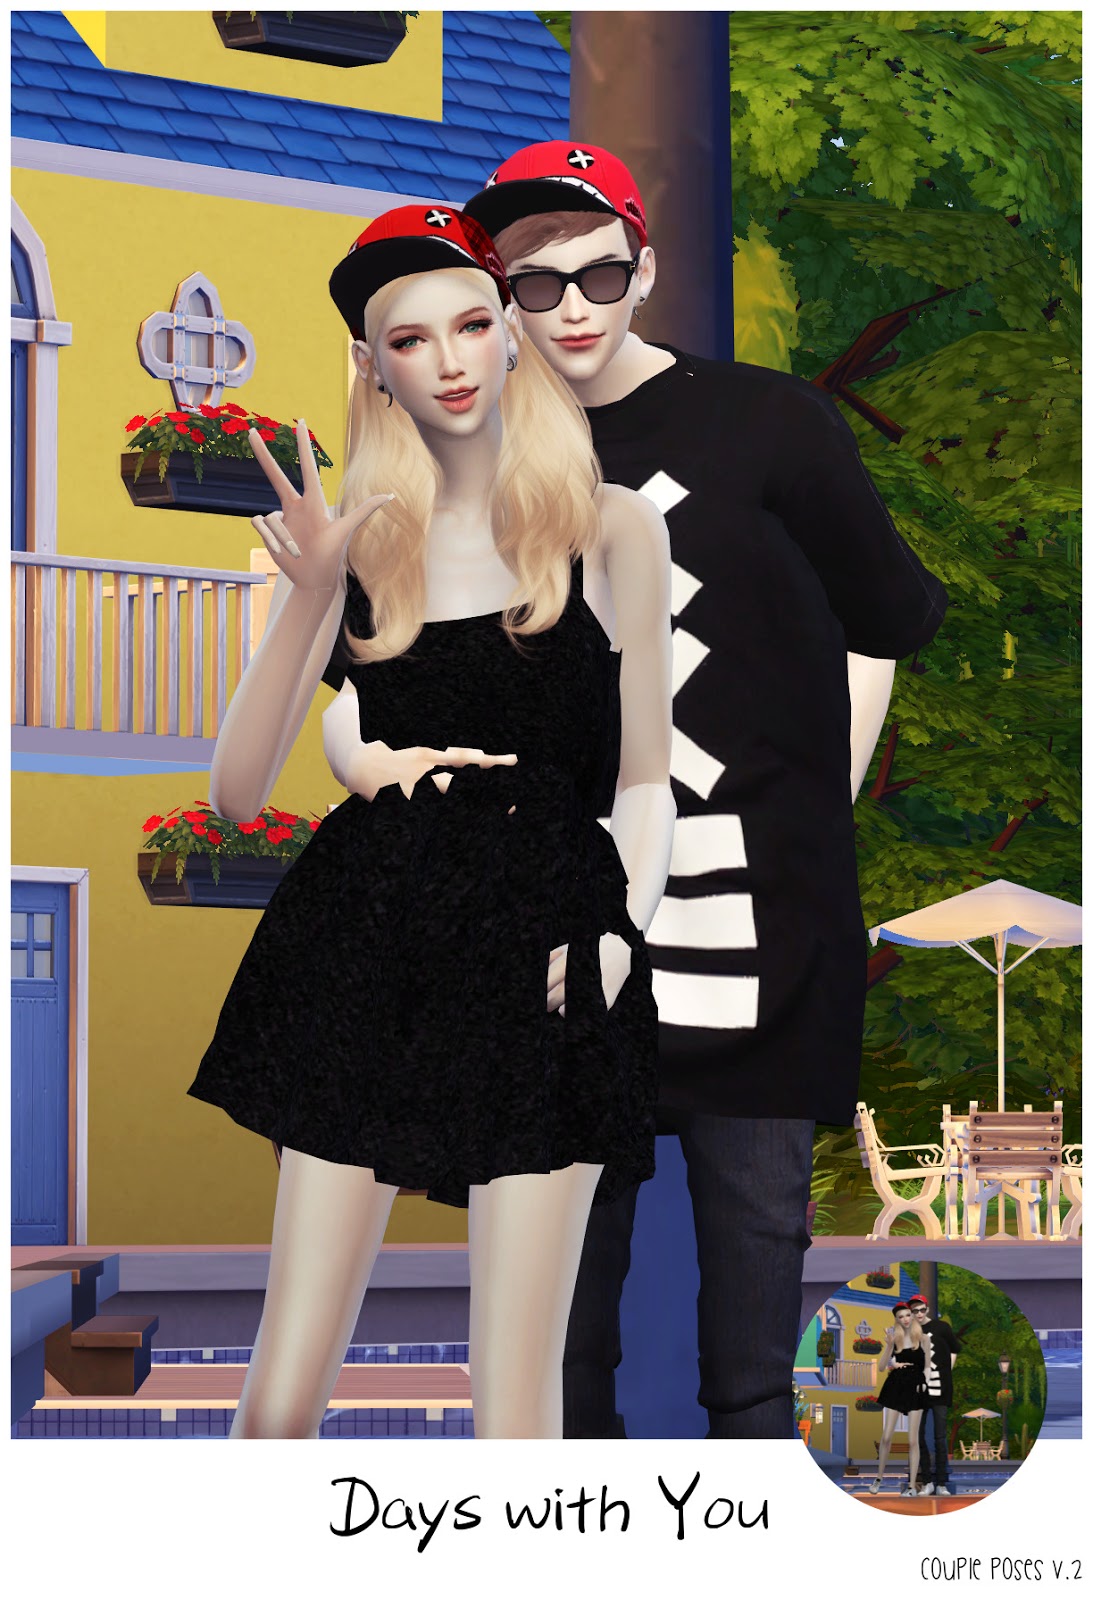 Sims 4 Ccs The Best Days With You Couple Poses By Flower Chamber